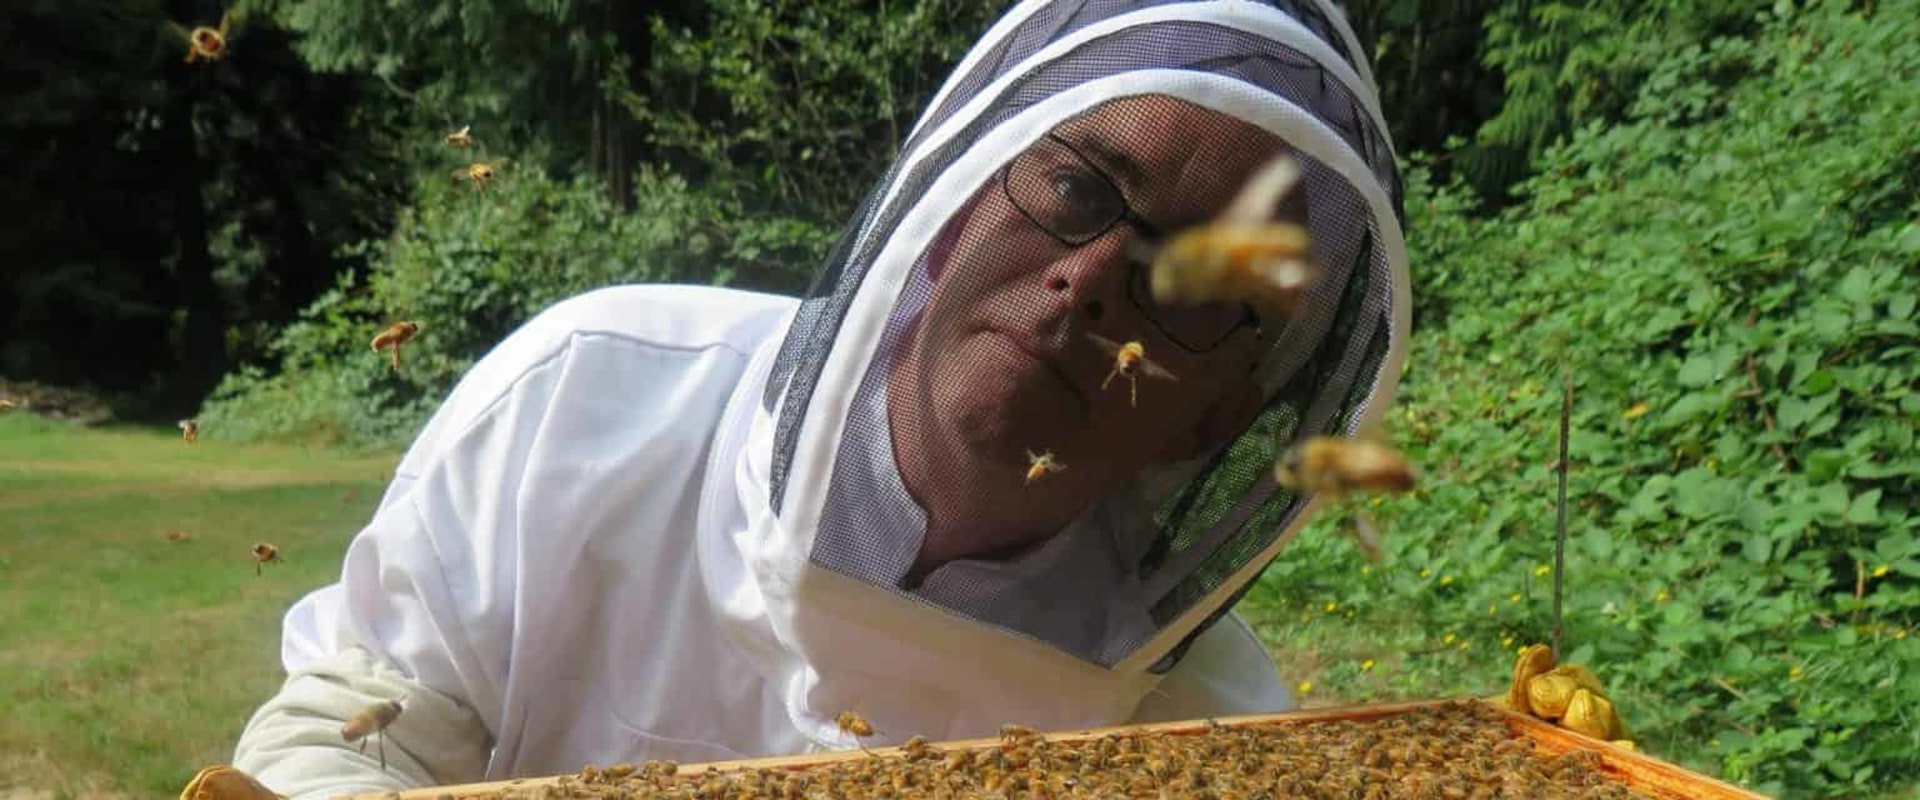 An Ultimate Guide to Online Forums and Communities for Beekeeping Enthusiasts